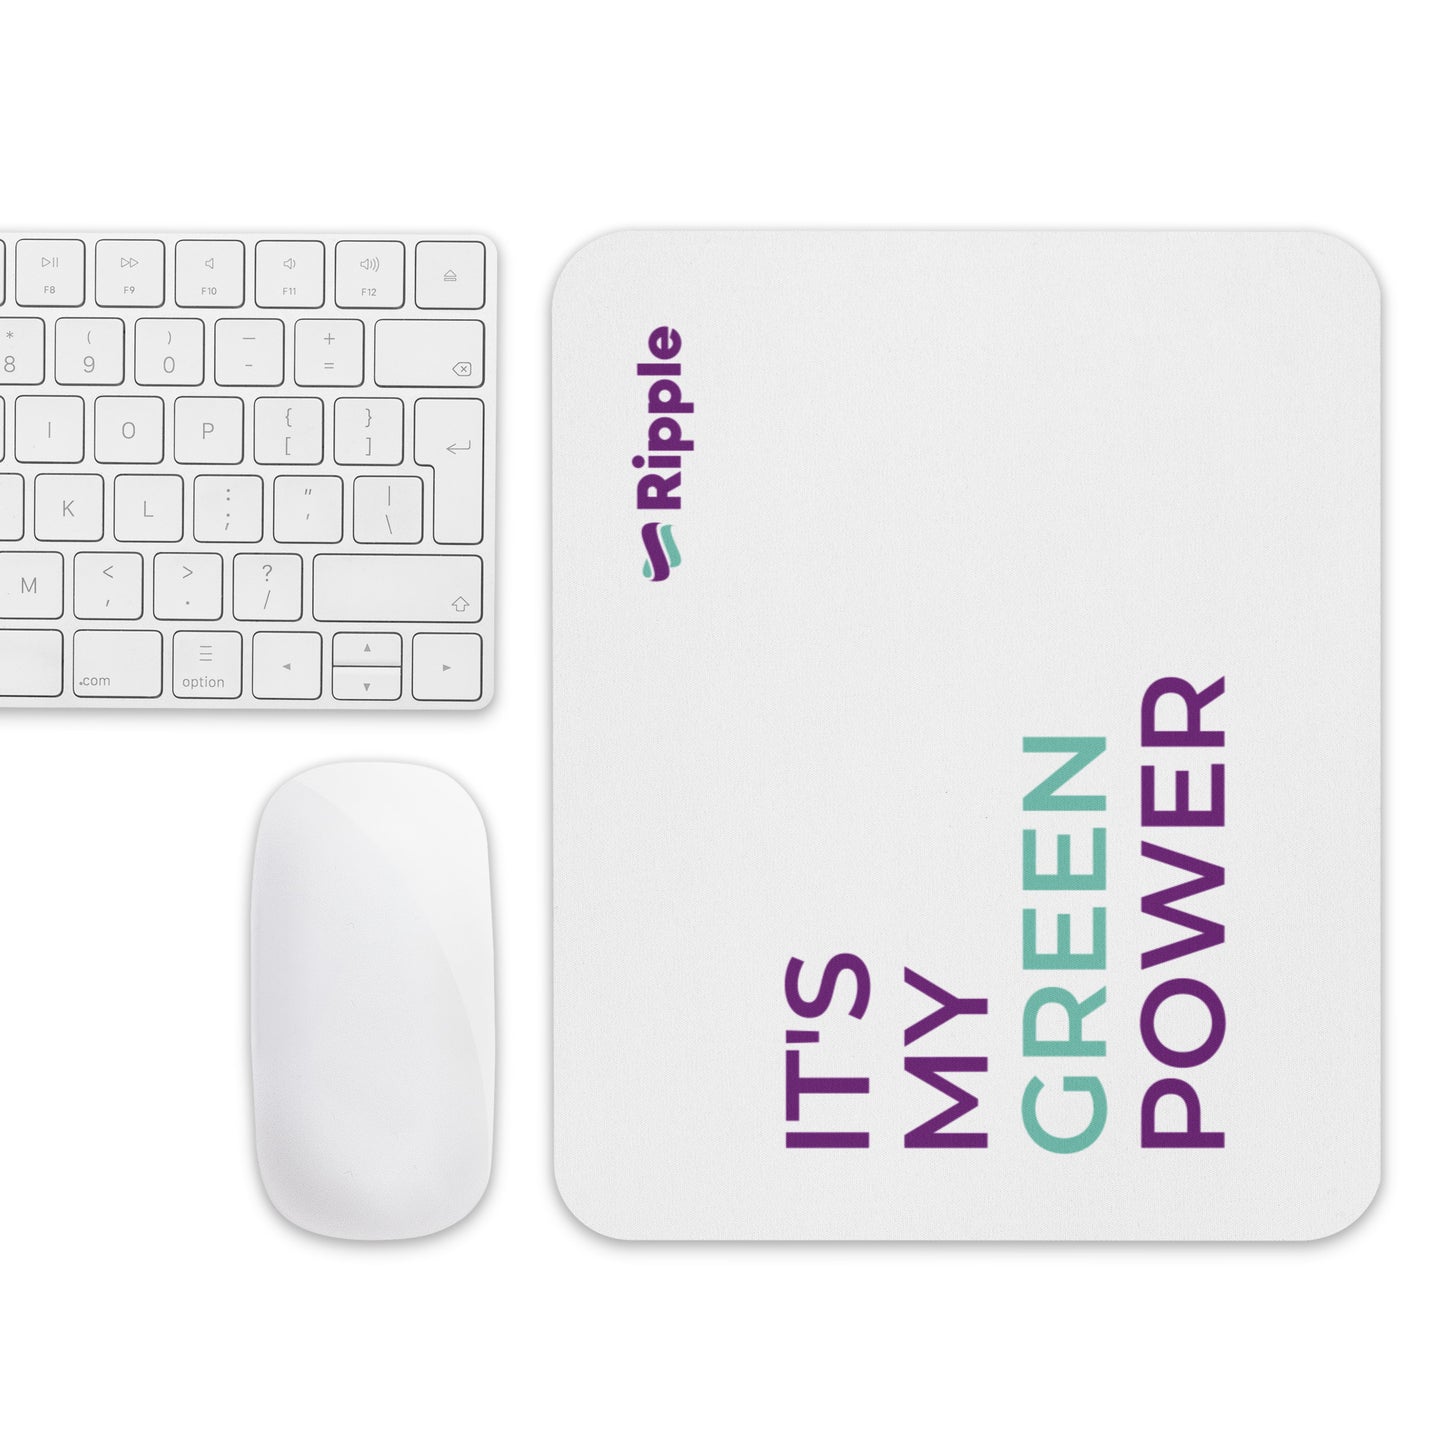 'It's my green power' mouse pad